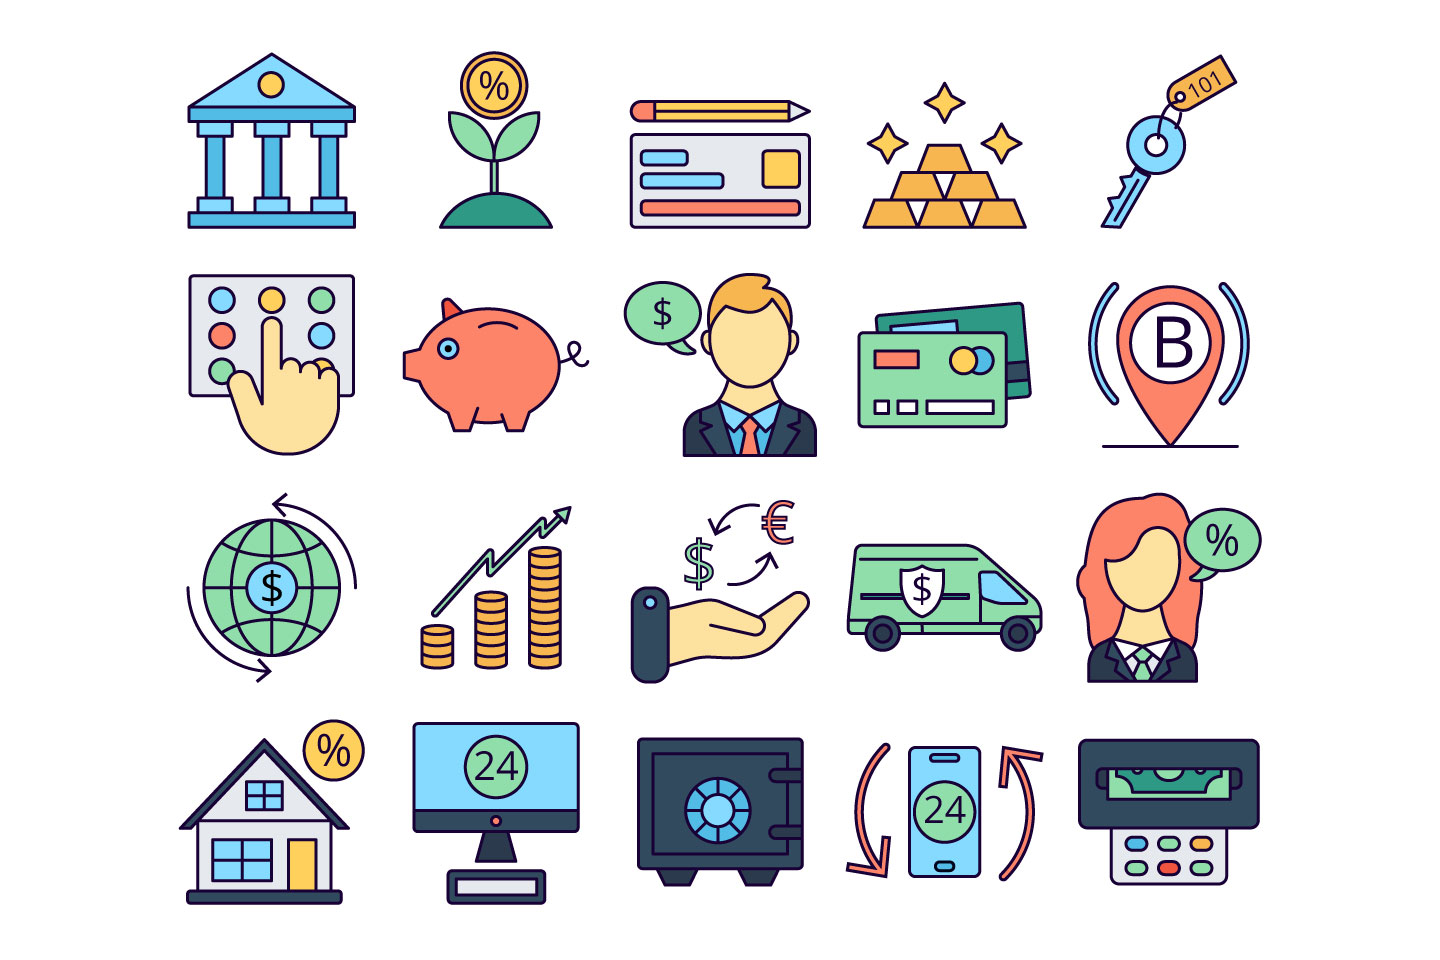 Download Banking Vector Free Icon Set - GraphicSurf.com